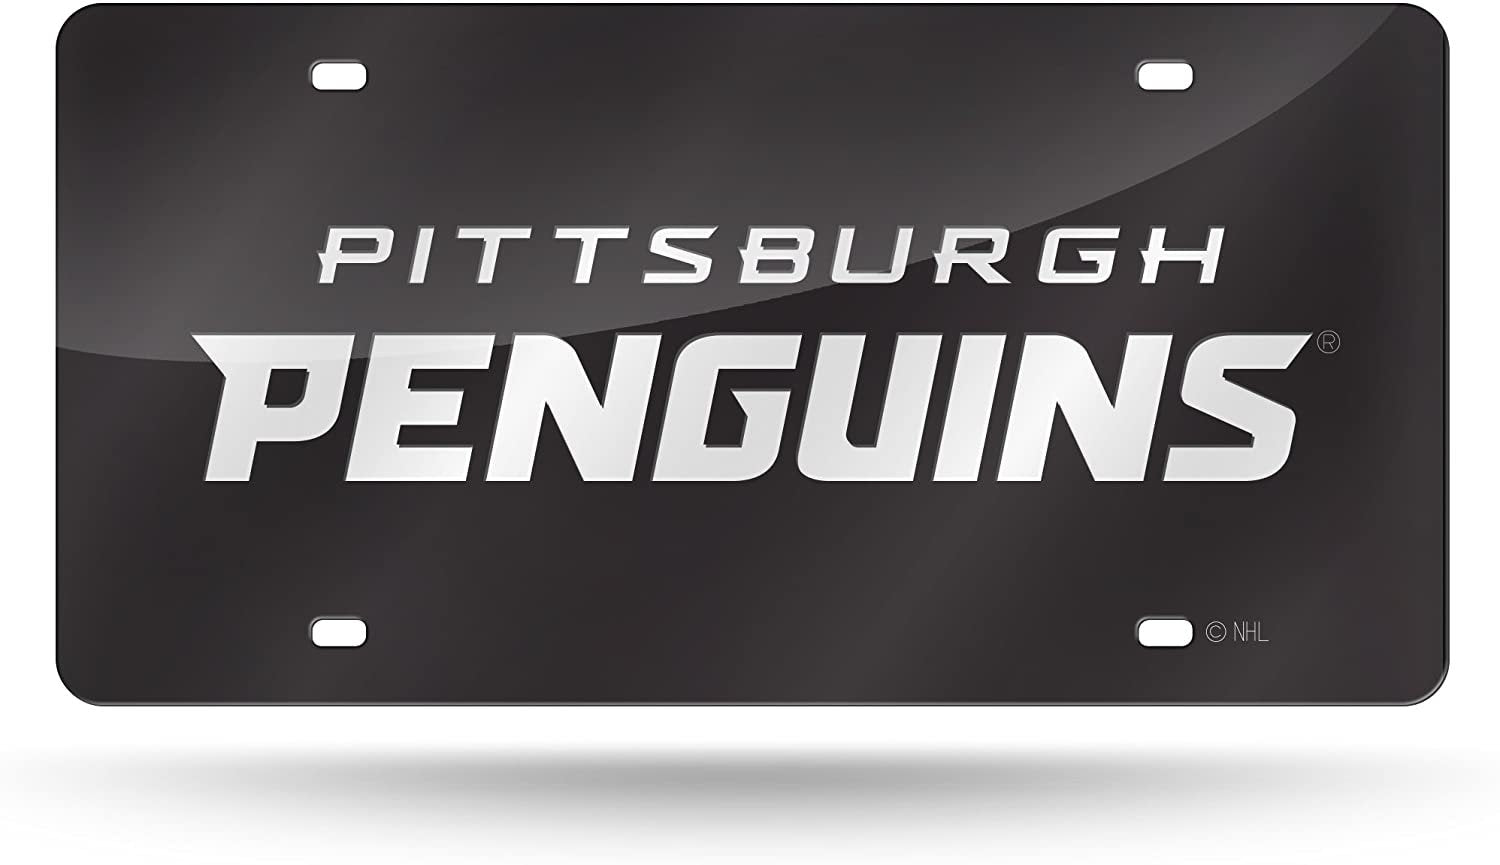 Pittsburgh Penguins Premium Laser Cut Tag License Plate, Black Mirrored Acrylic Inlaid, 12x6 Inch